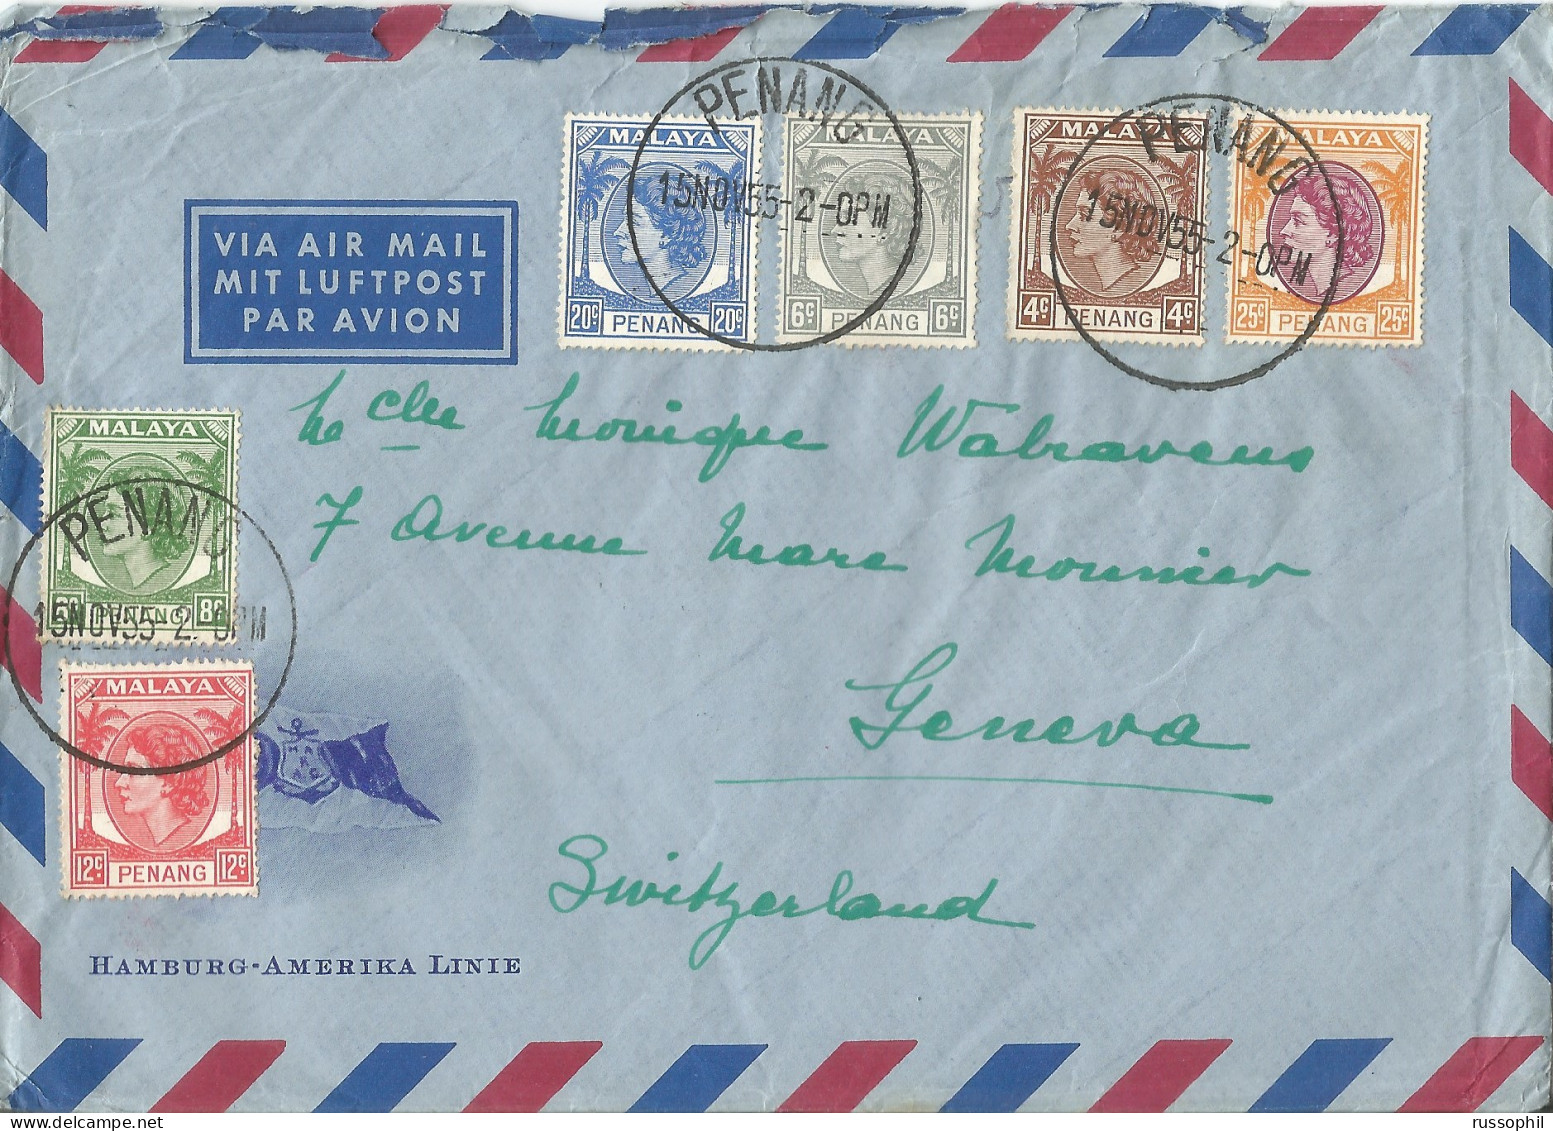 HAMBURG AMERIKA LINIE - CARGO PASSENGER "HAMBURG" - BRIEF WITH CONTENT POSTED DURING STOPOVER IN MALAYSIA PENANG - 1955 - 1950 - ...